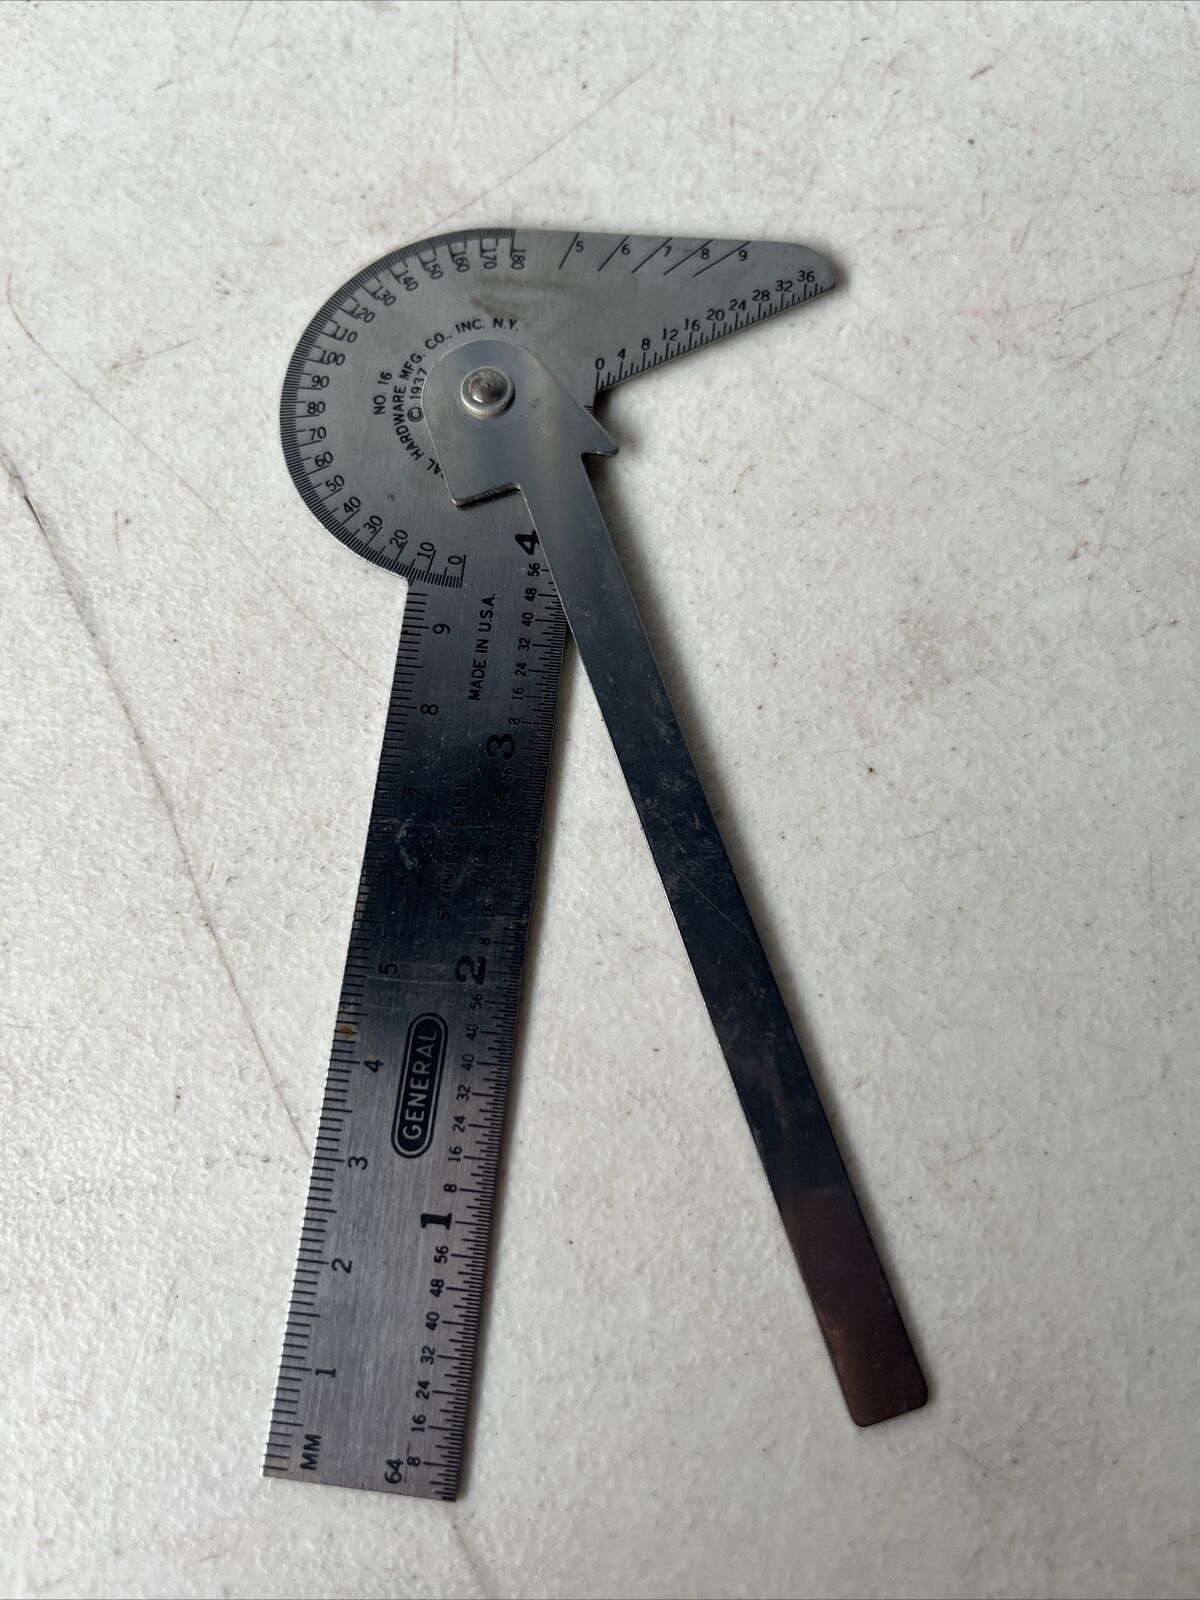 Vintage General Hardware NY No. 16 Stainless Steel Protractor Gauge (tb4.1)